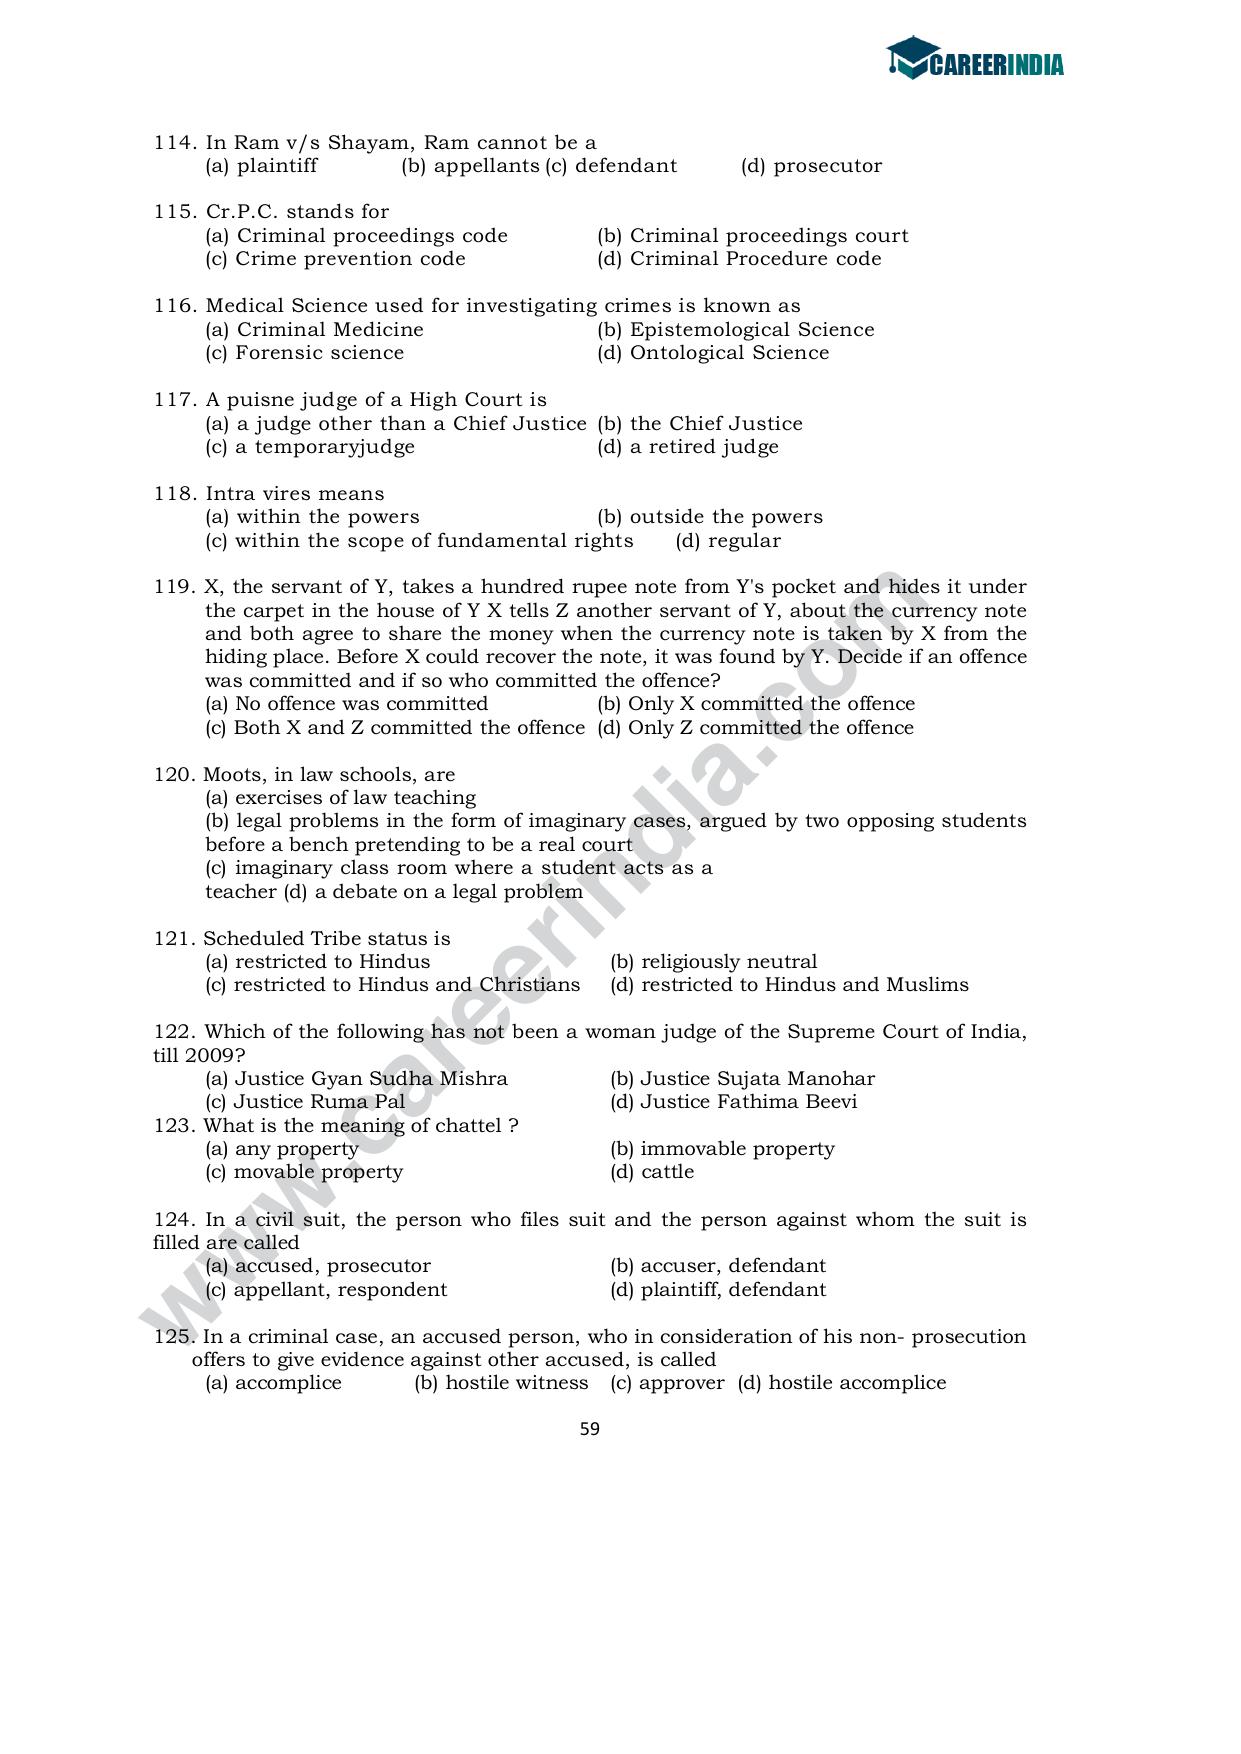 CLAT 2010 UG Sample Question Paper - Page 12